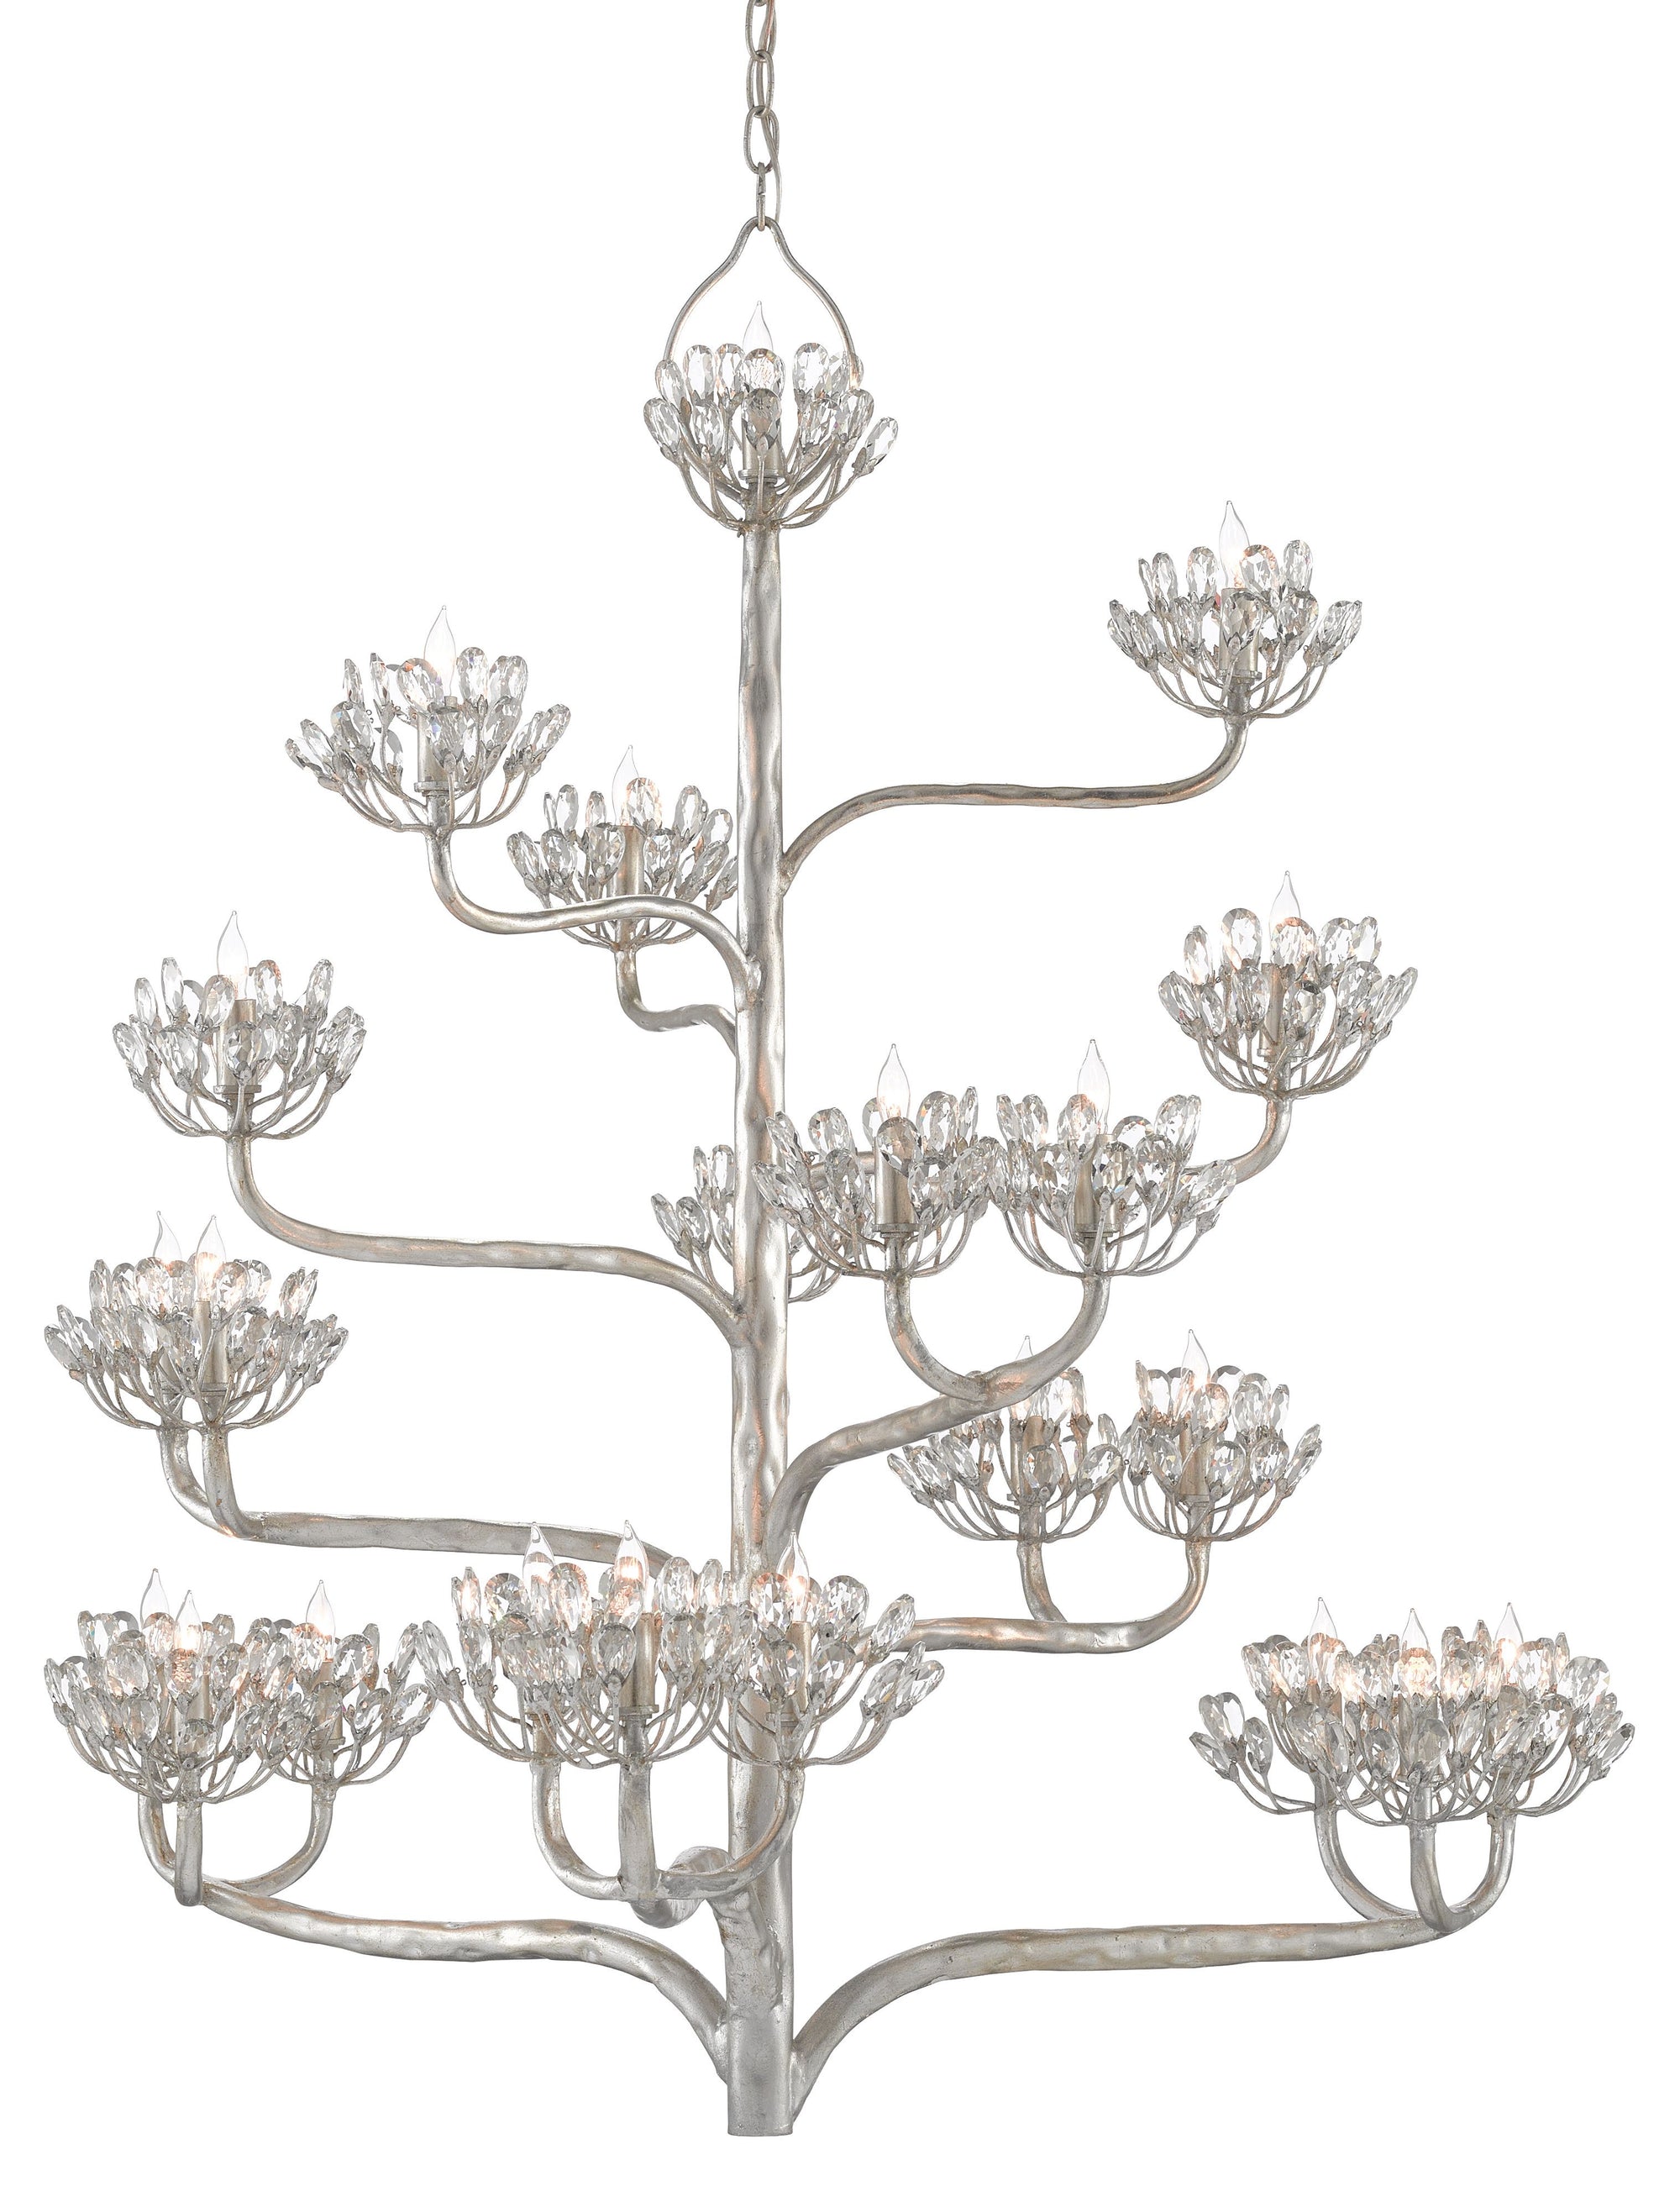 Agave Americana Silver Chandelier